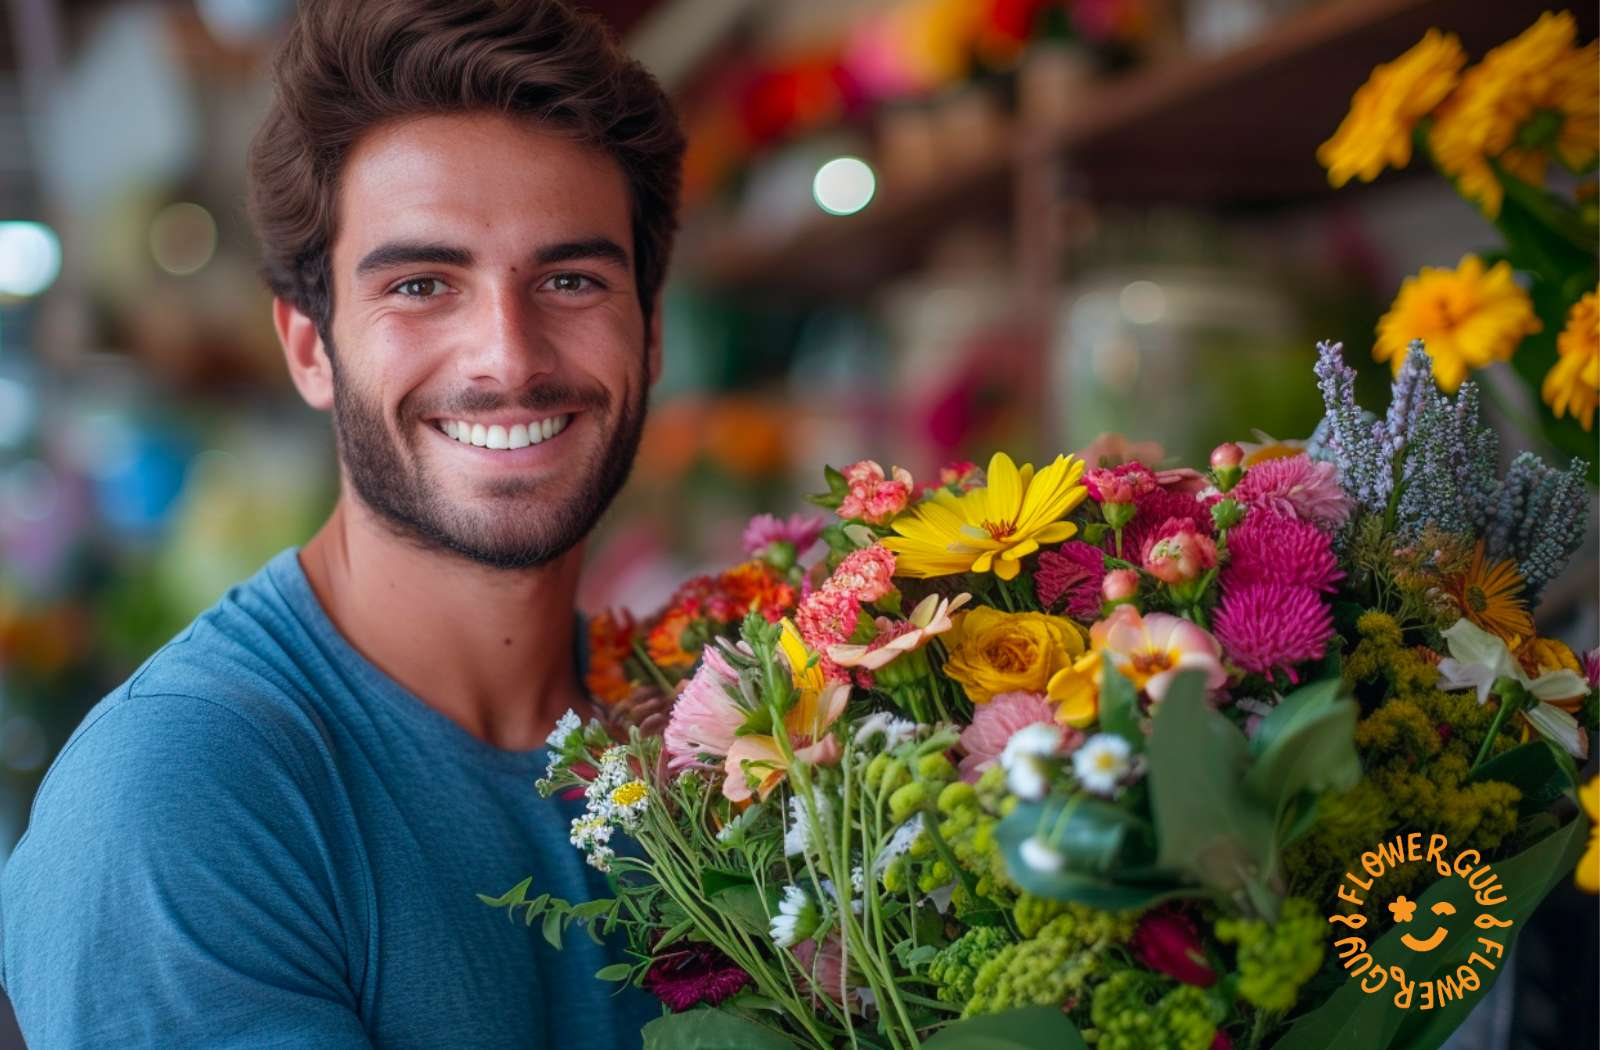 Order a great gift of happy birthday flowers, fine wine, roses as they celebrate a year older. Man smiling with mixed bouquet.